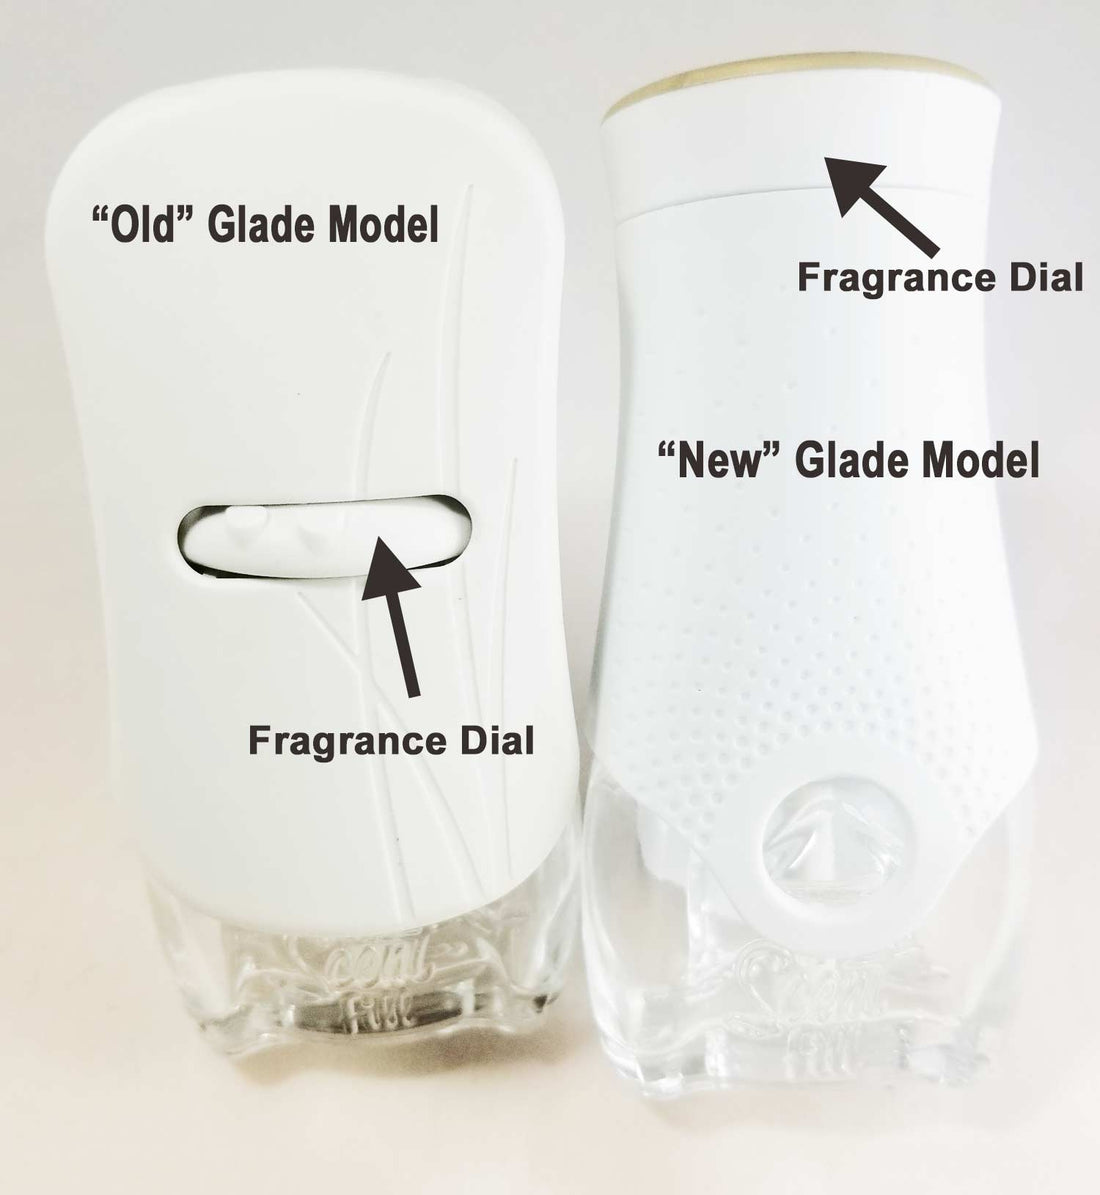 Operating Glade Plugin Oil Warmer How To With Instructions